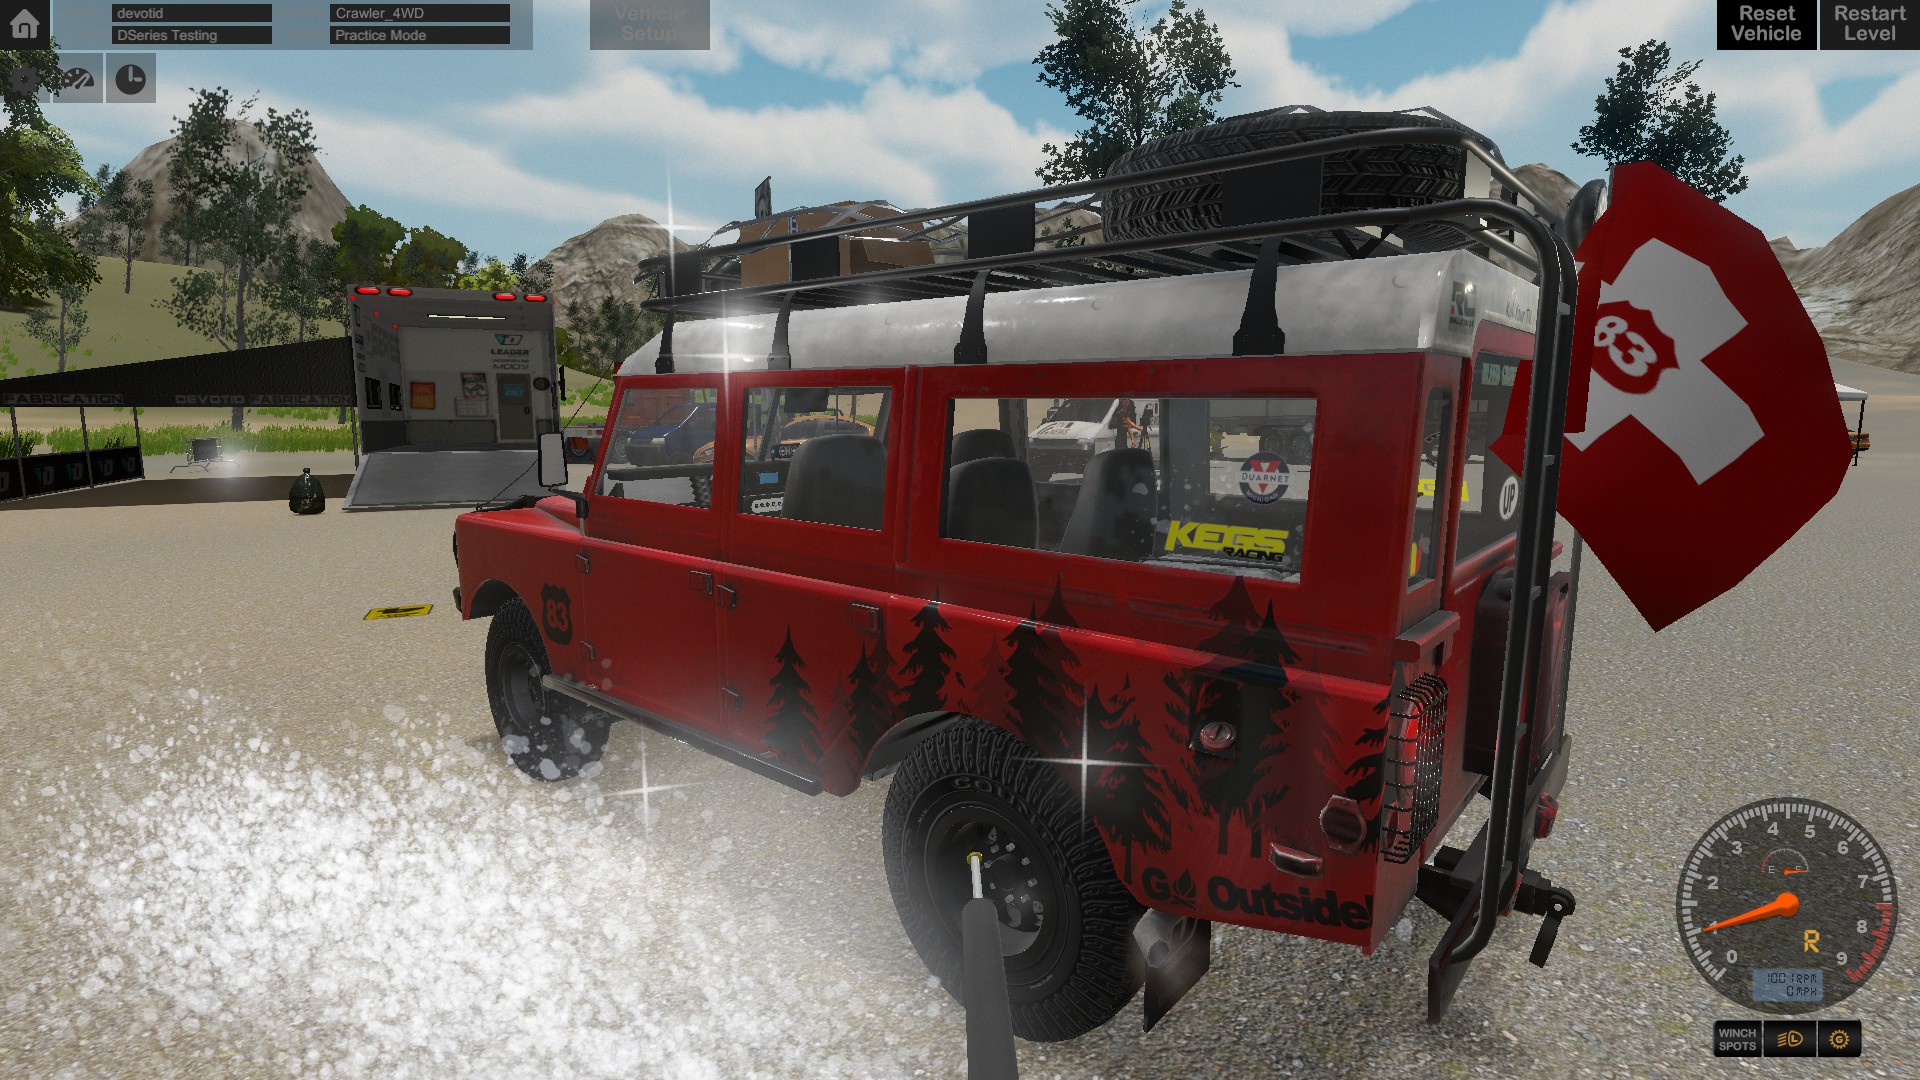 Offroad Vehicle Simulation free instal